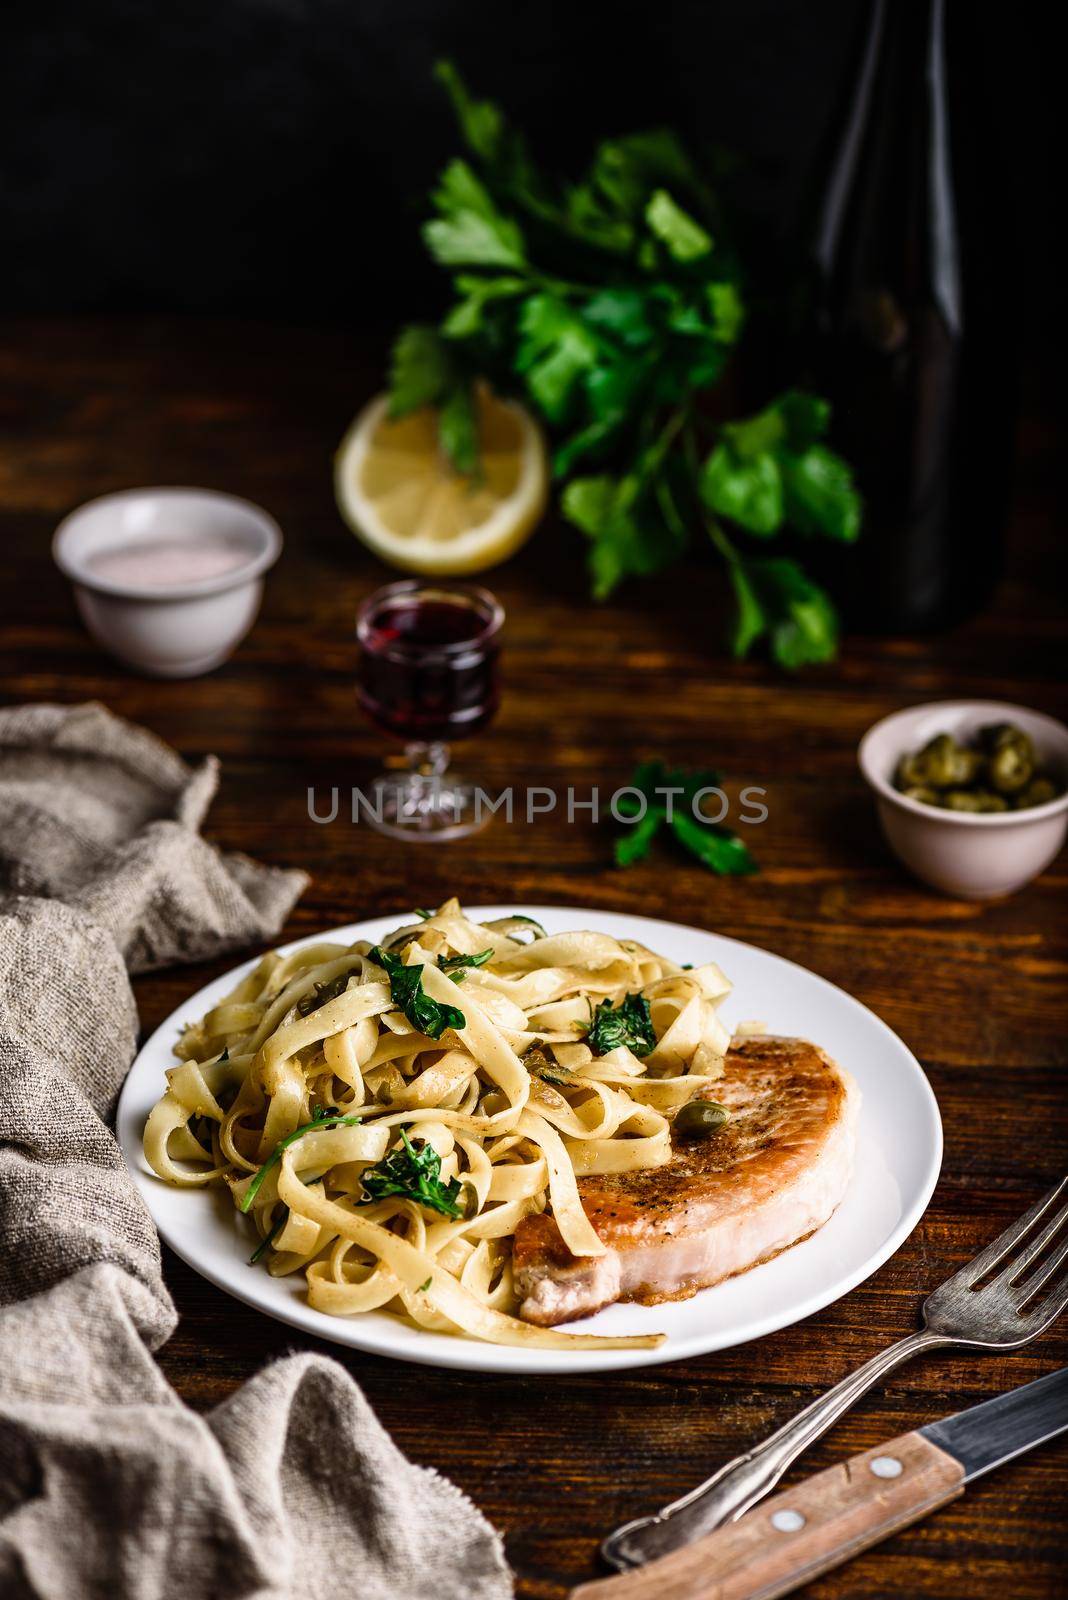 Pork chop steak and pasta with capers and lemon zest